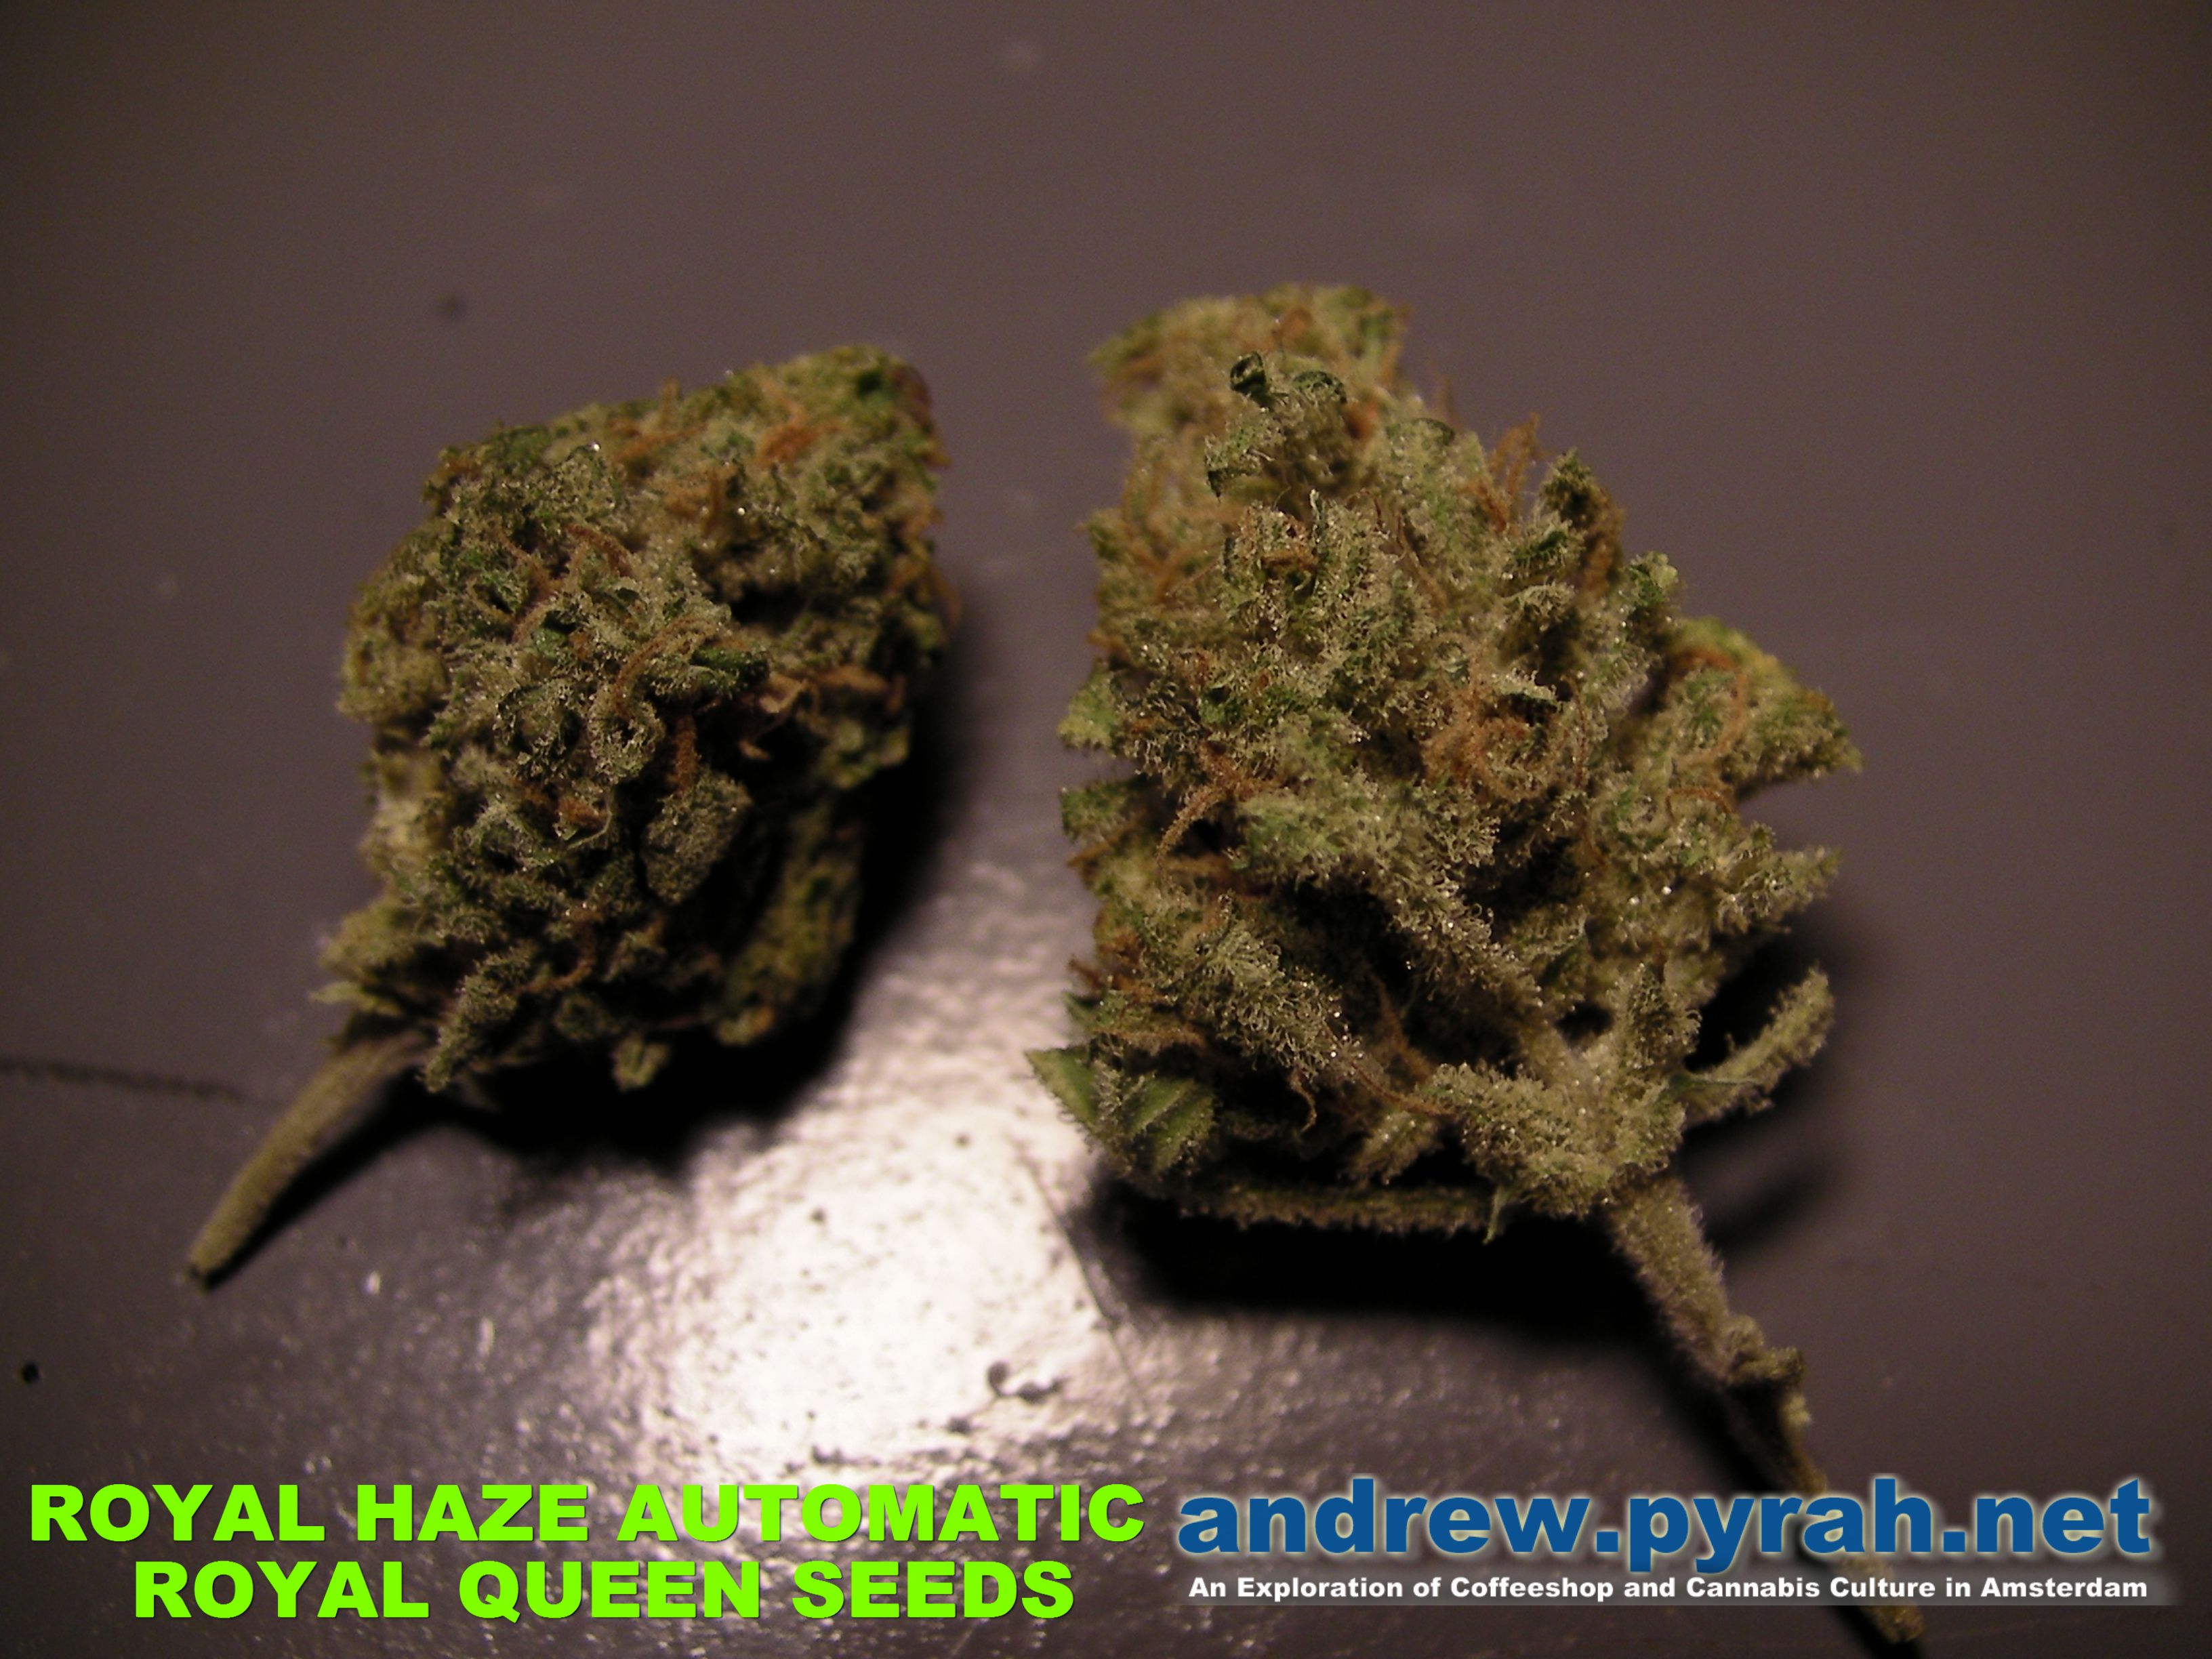 Royal Haze Automatic THE GROW – The Weed Review